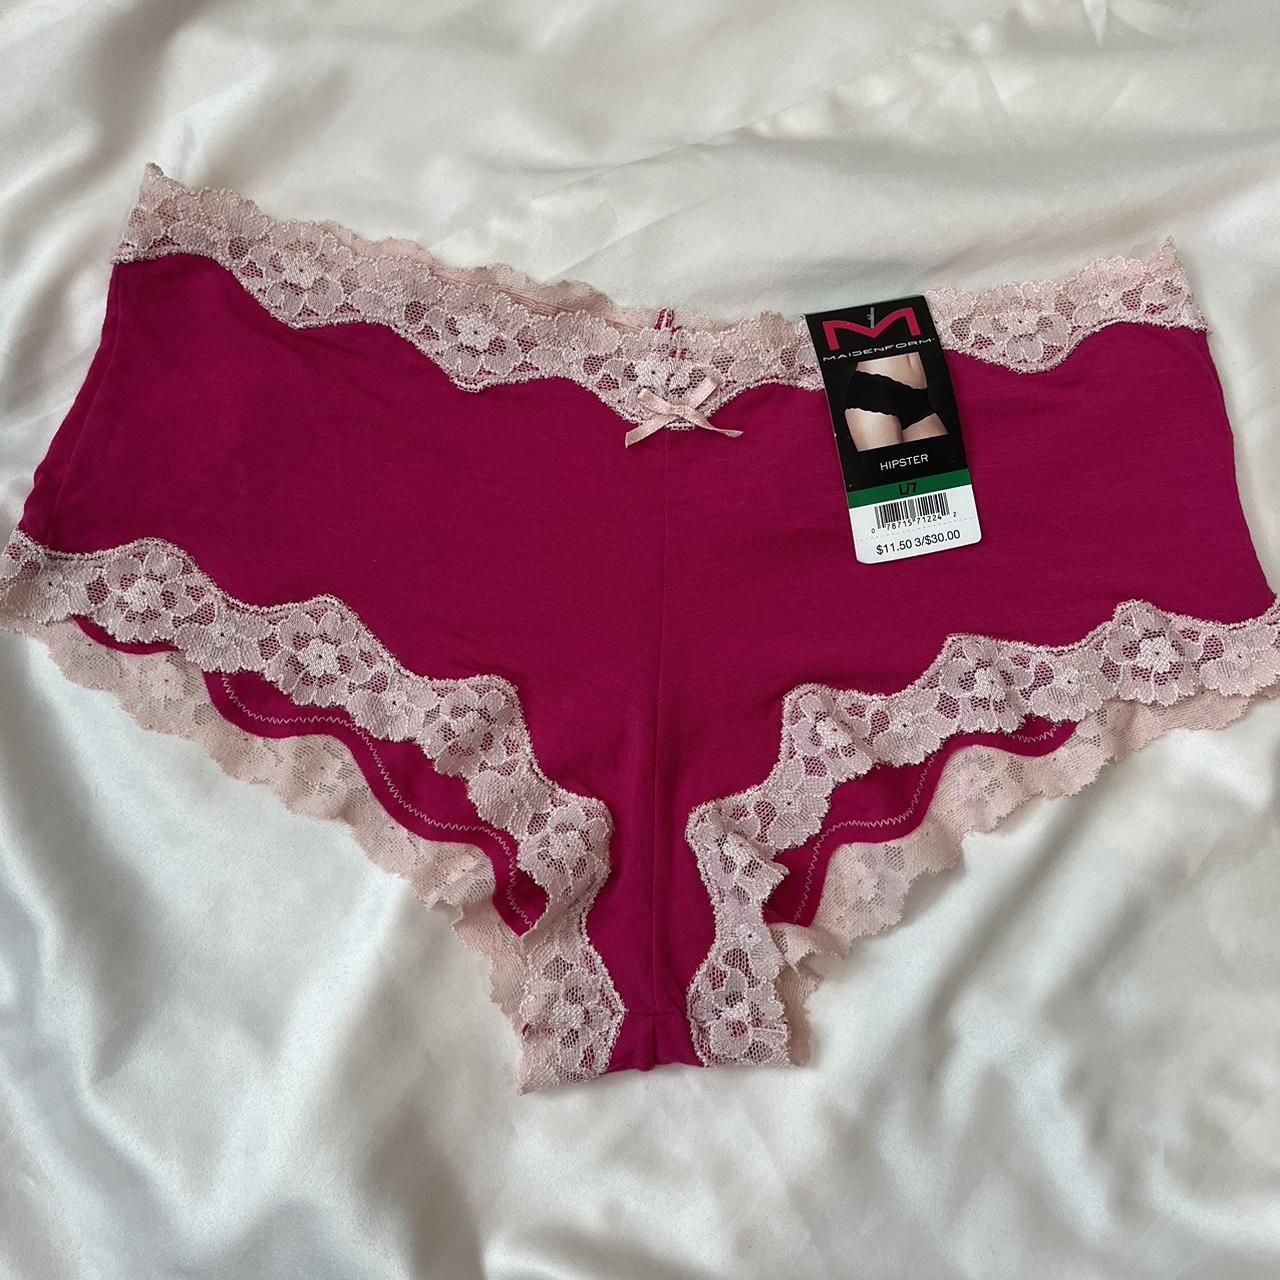 Hipster Underwear – Cheeky, Lace Trim and More at Maidenform